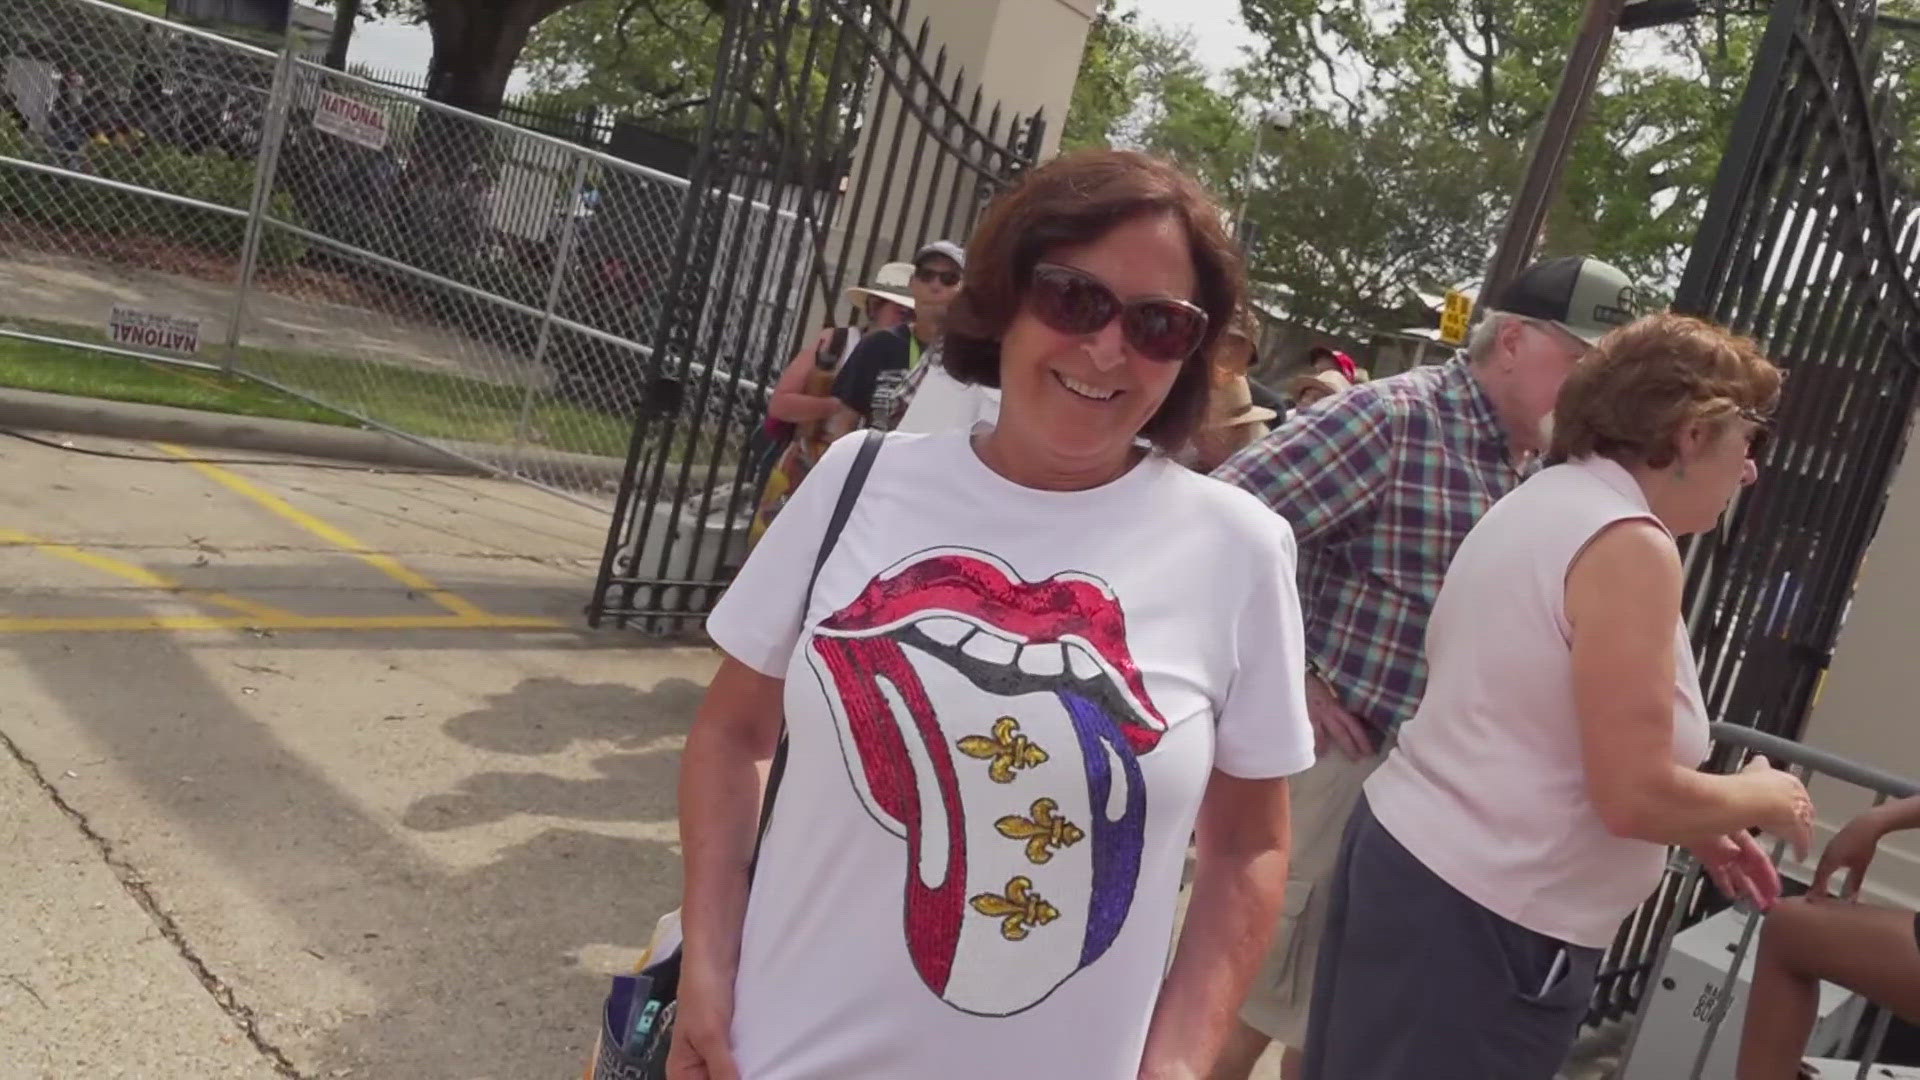 Stones fans have been "Waiting on a Friend" to play at the Fairgrounds since 2019. That's when the festival first announced they were going to appear.